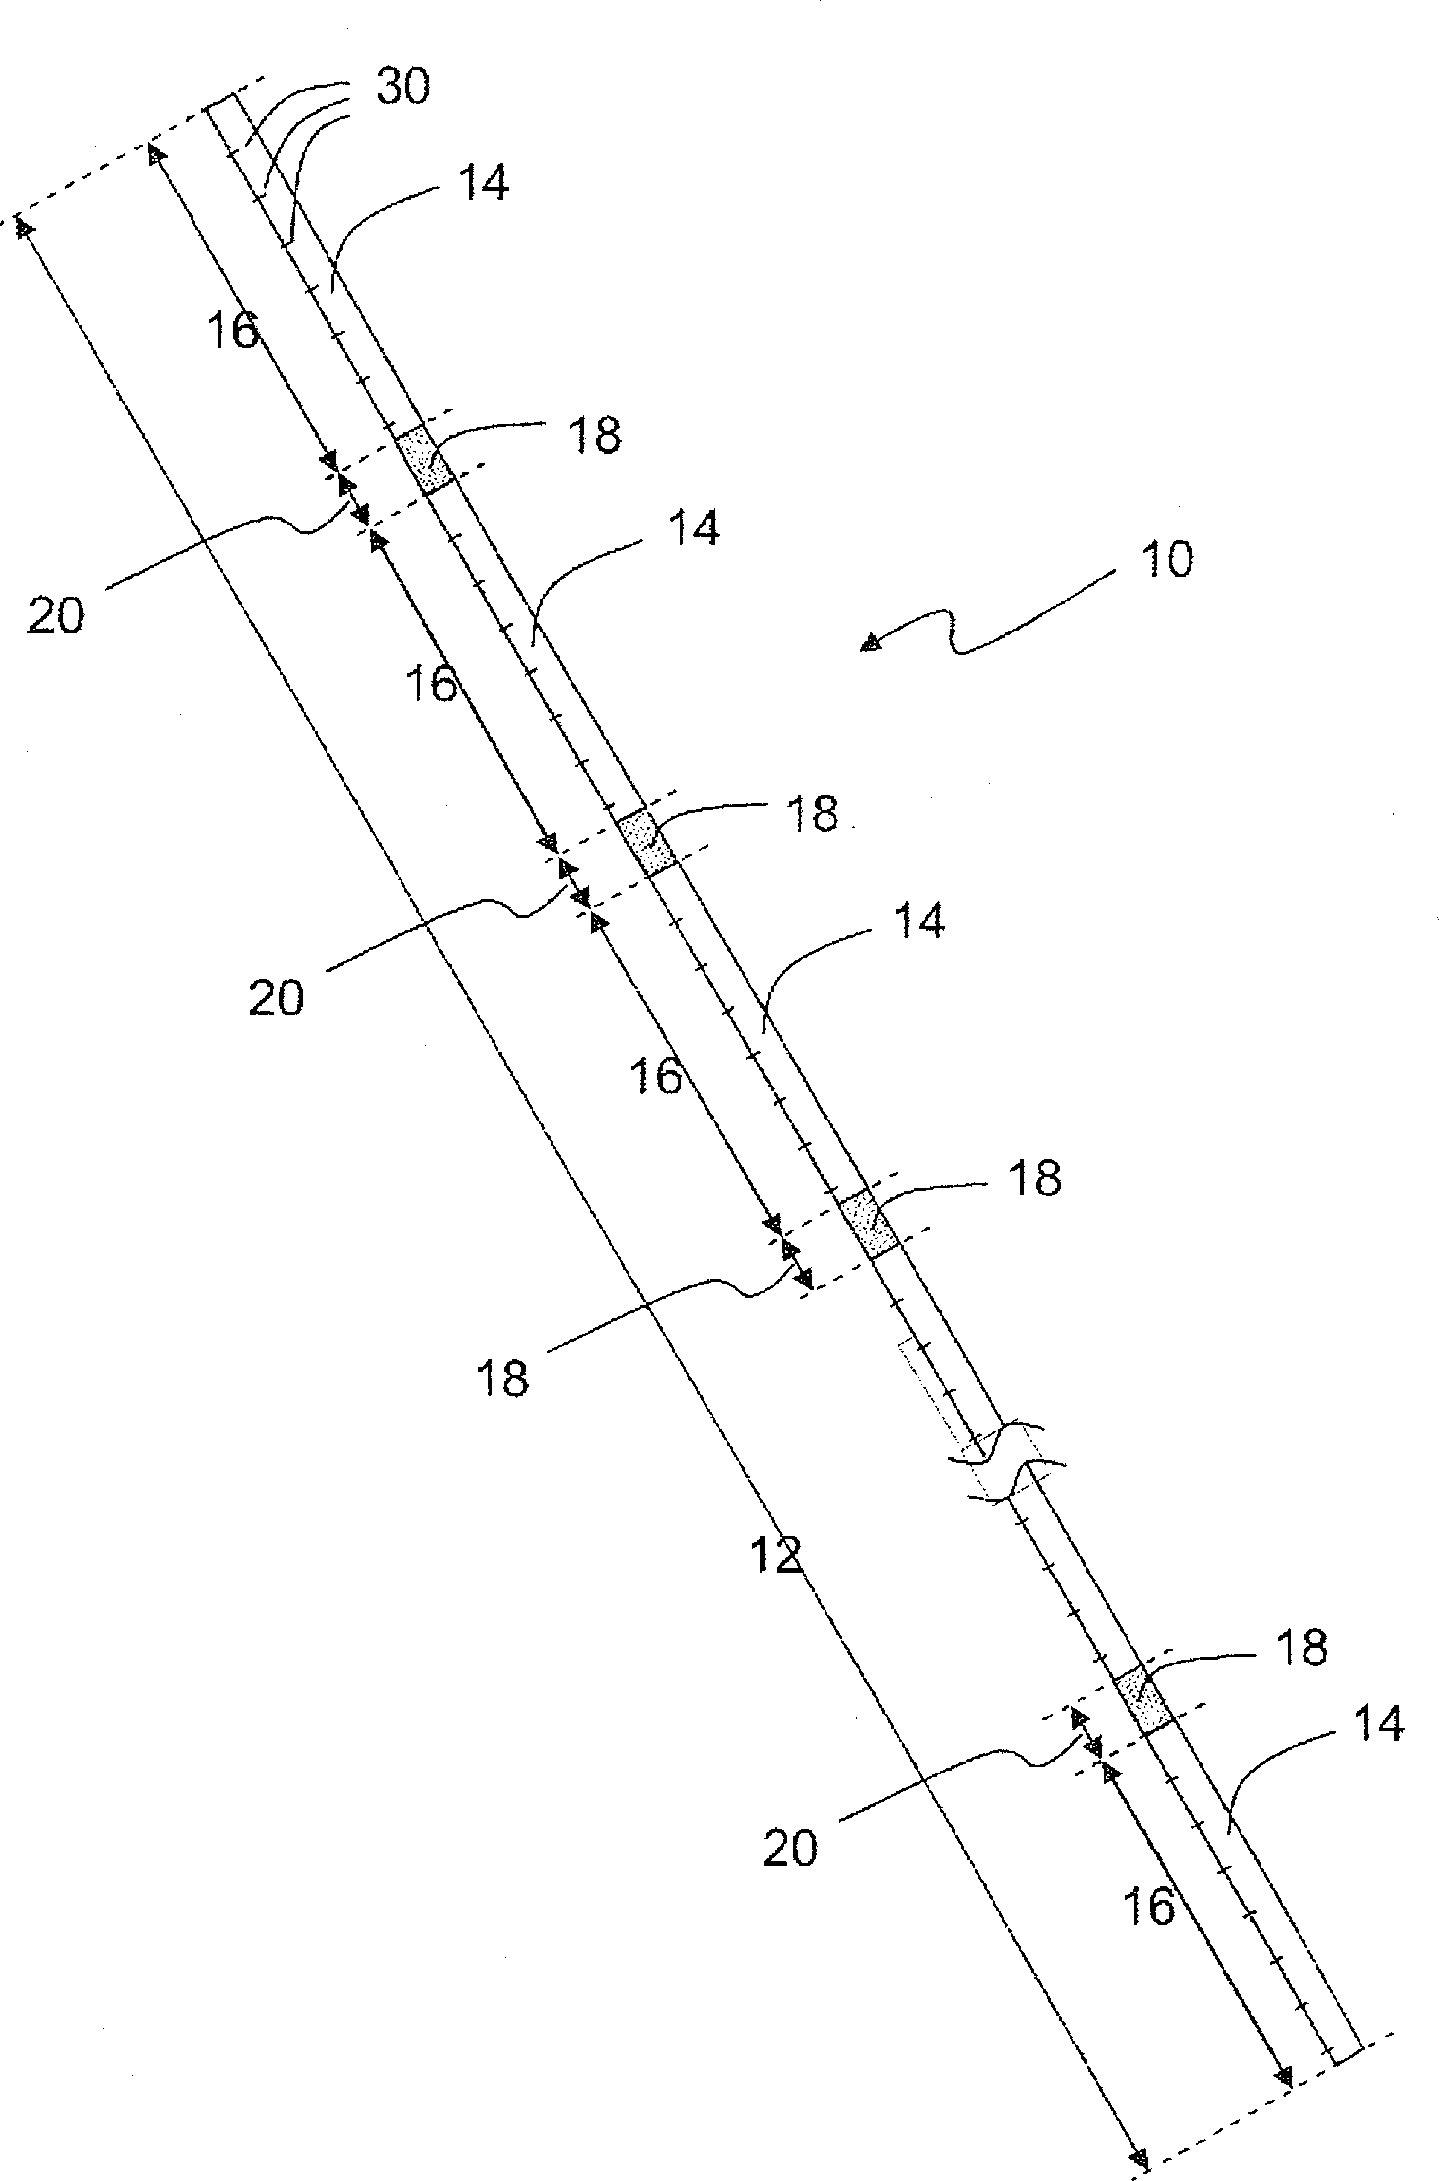 Method for installing a profiled extruded section